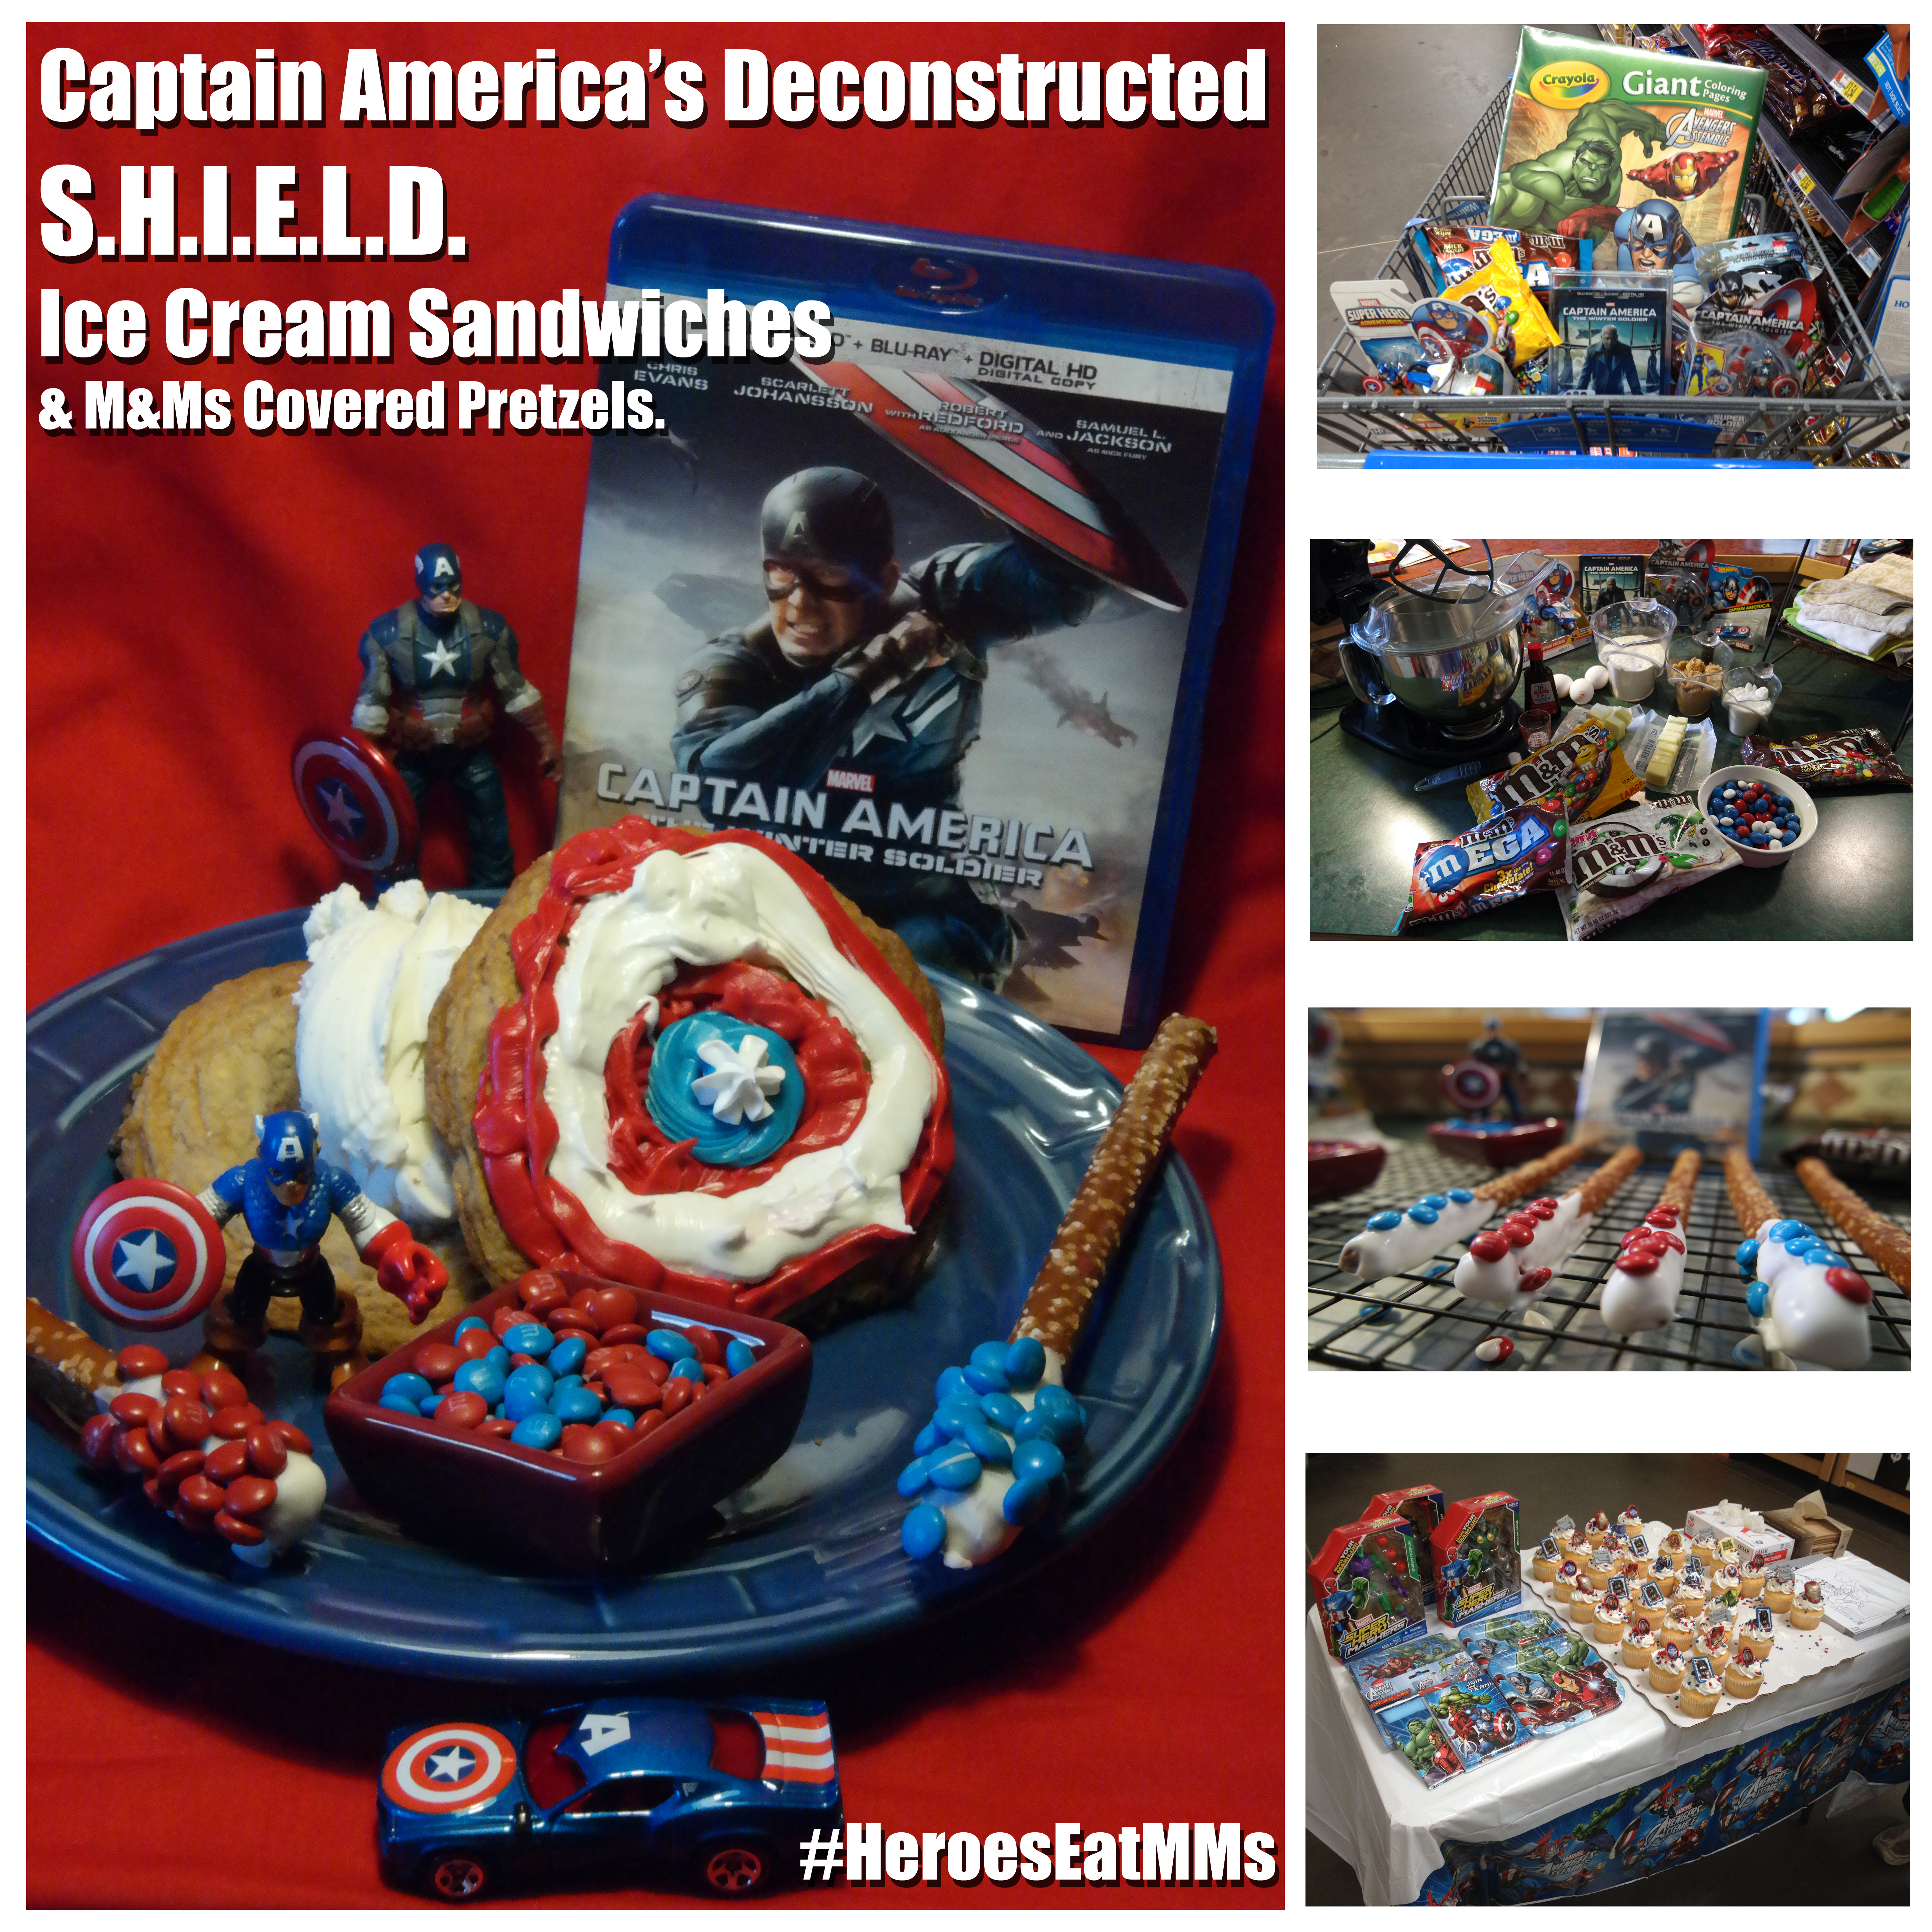 #HeroesEatMMs with Captain America’s Deconstructed S.H.I.E.L.D. M&M’s Cookie Ice Cream Sandwiches